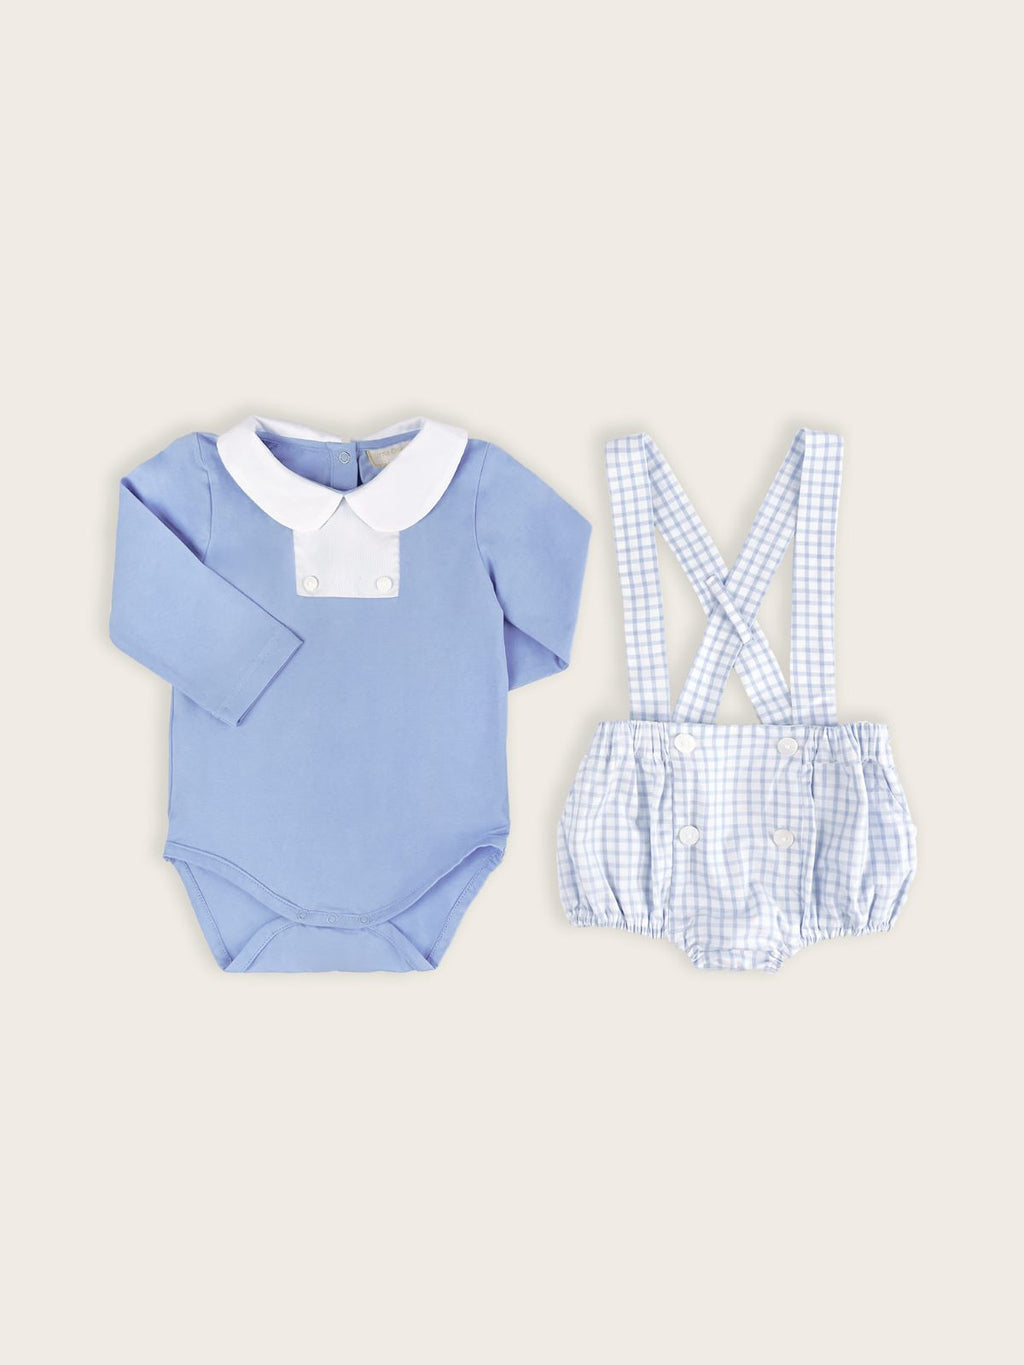 Blue bodysuit for baby boys with check bloomer